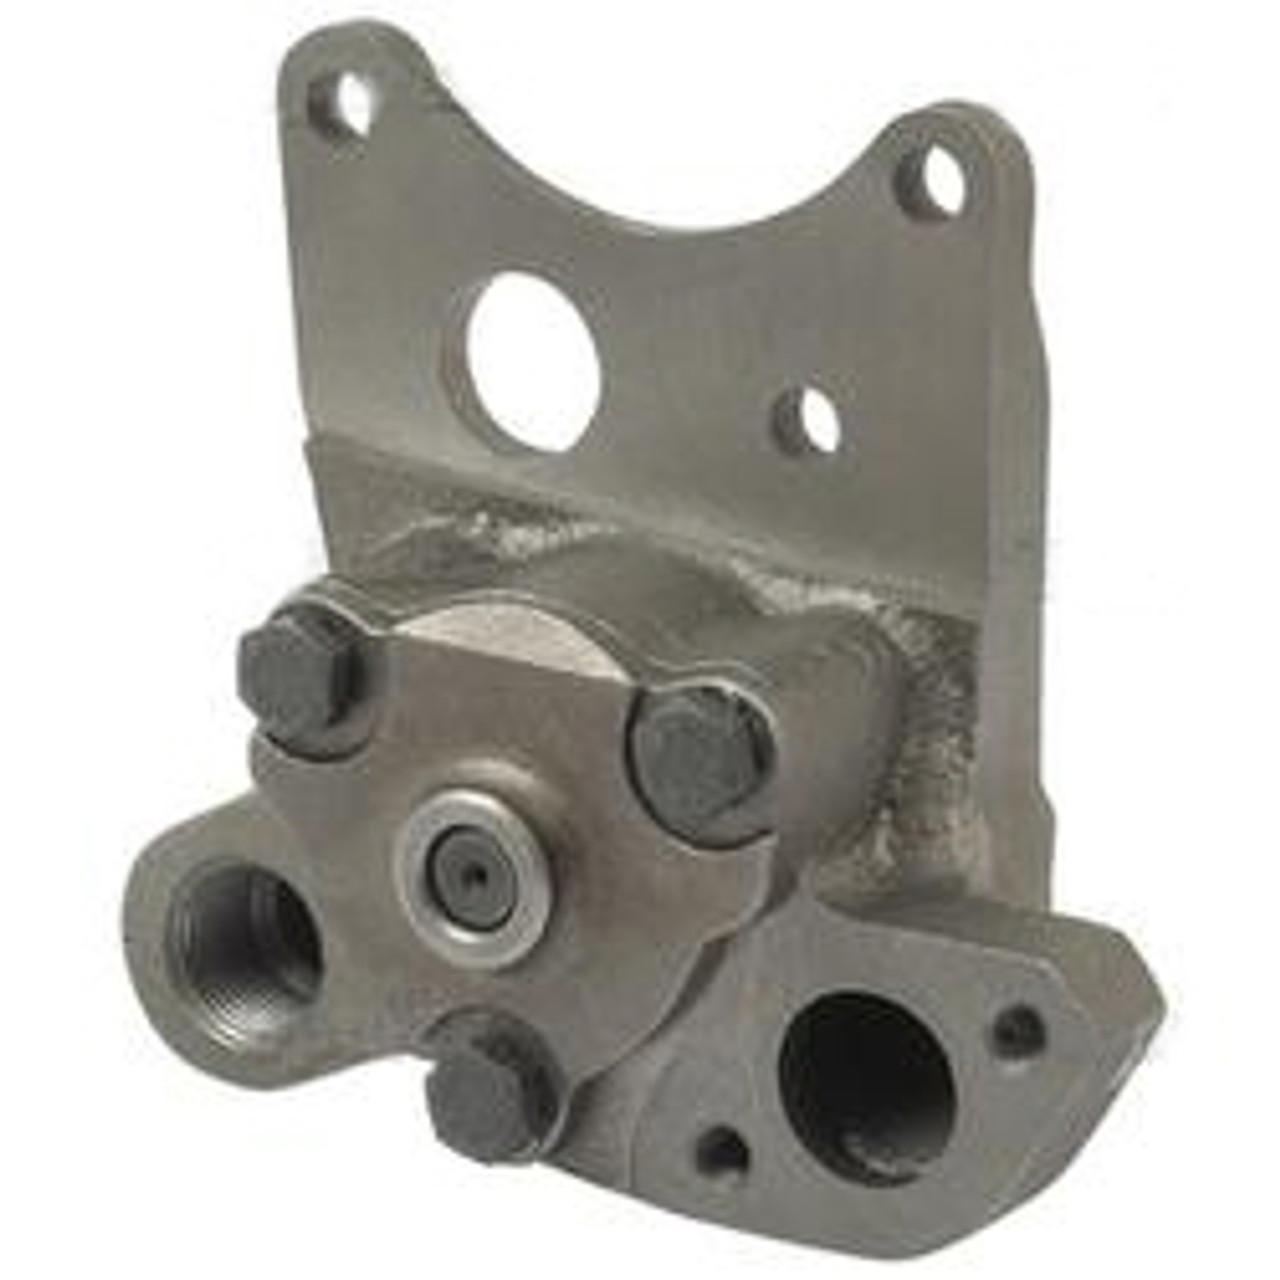 Perkins Sabre M135  Oil Pump naturally aspirated from parts4engines.com